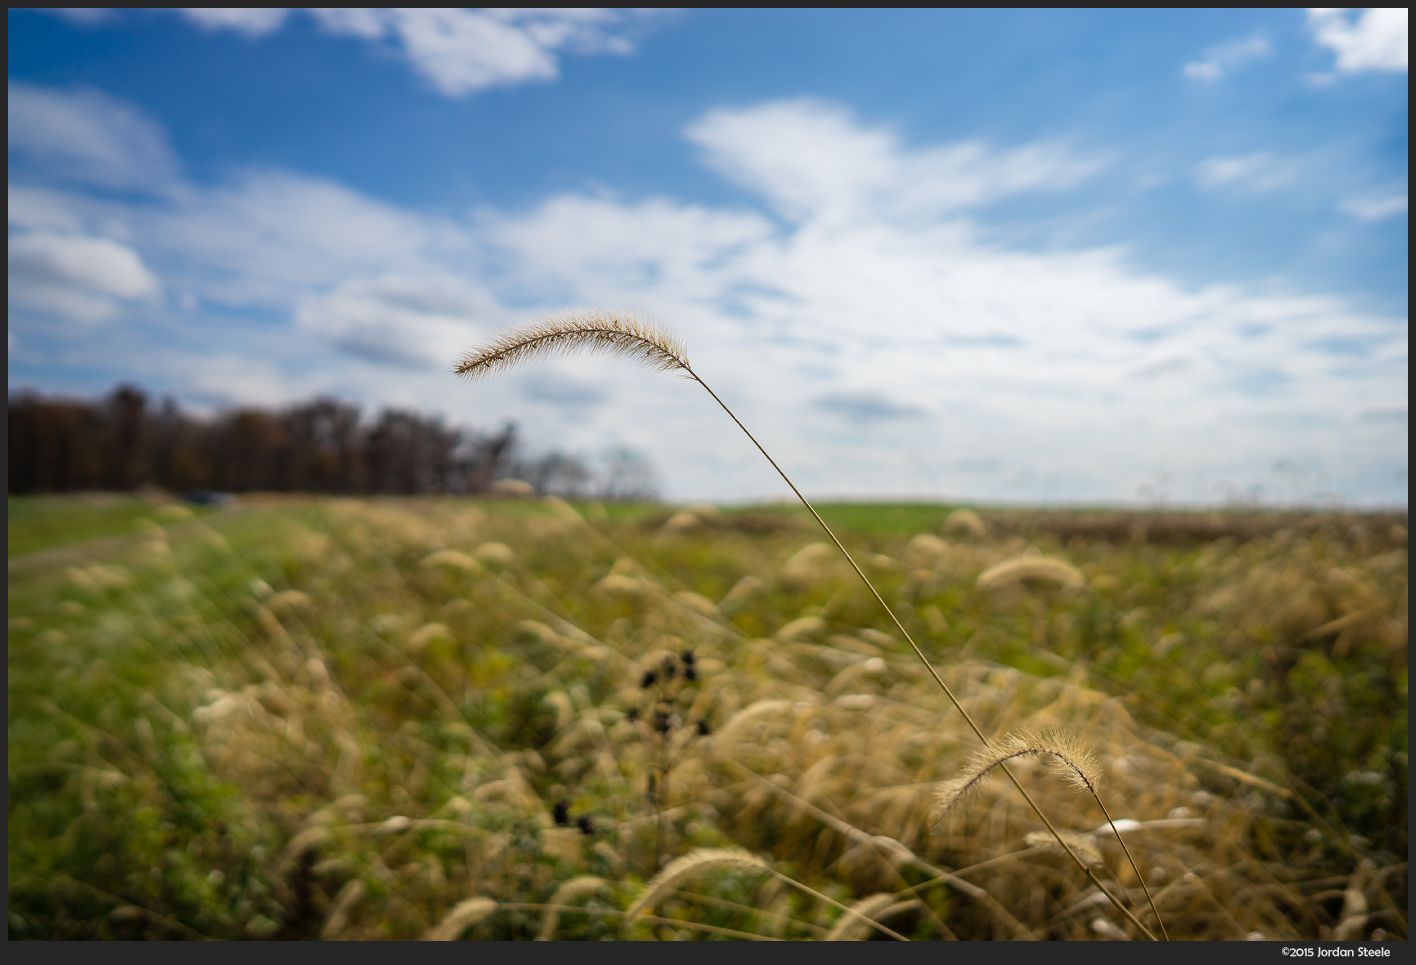 Grass in the Wind - Sony A7 II with Zeiss Batis 25mm f/2 Distagon @ f/2